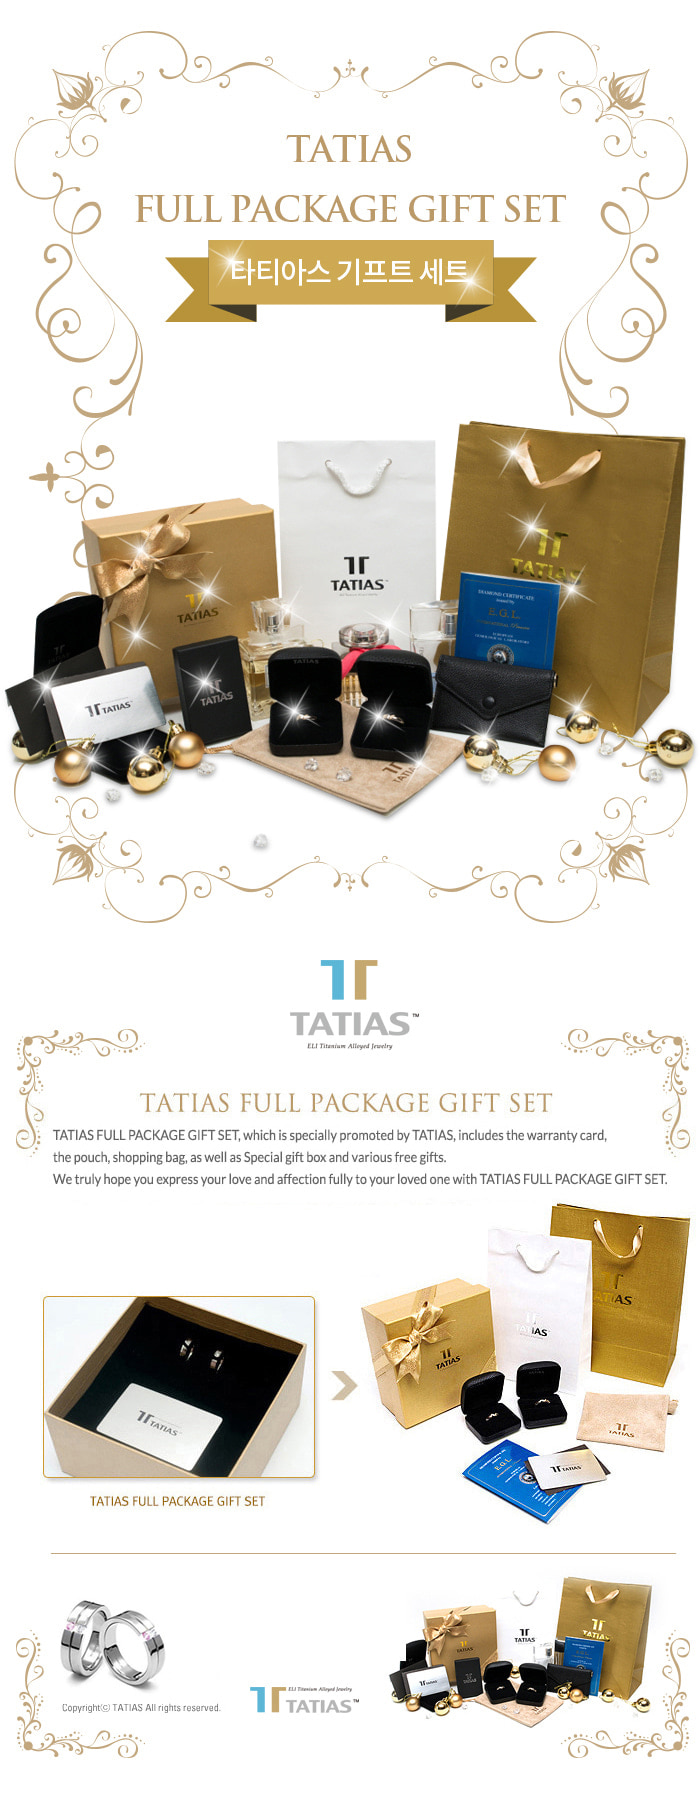 FULL PACKAGE GIFT SET, which is promoted by TATIAS, includes the warranty card, the pouch, shopping bag, as well as special gift box and free gifts.